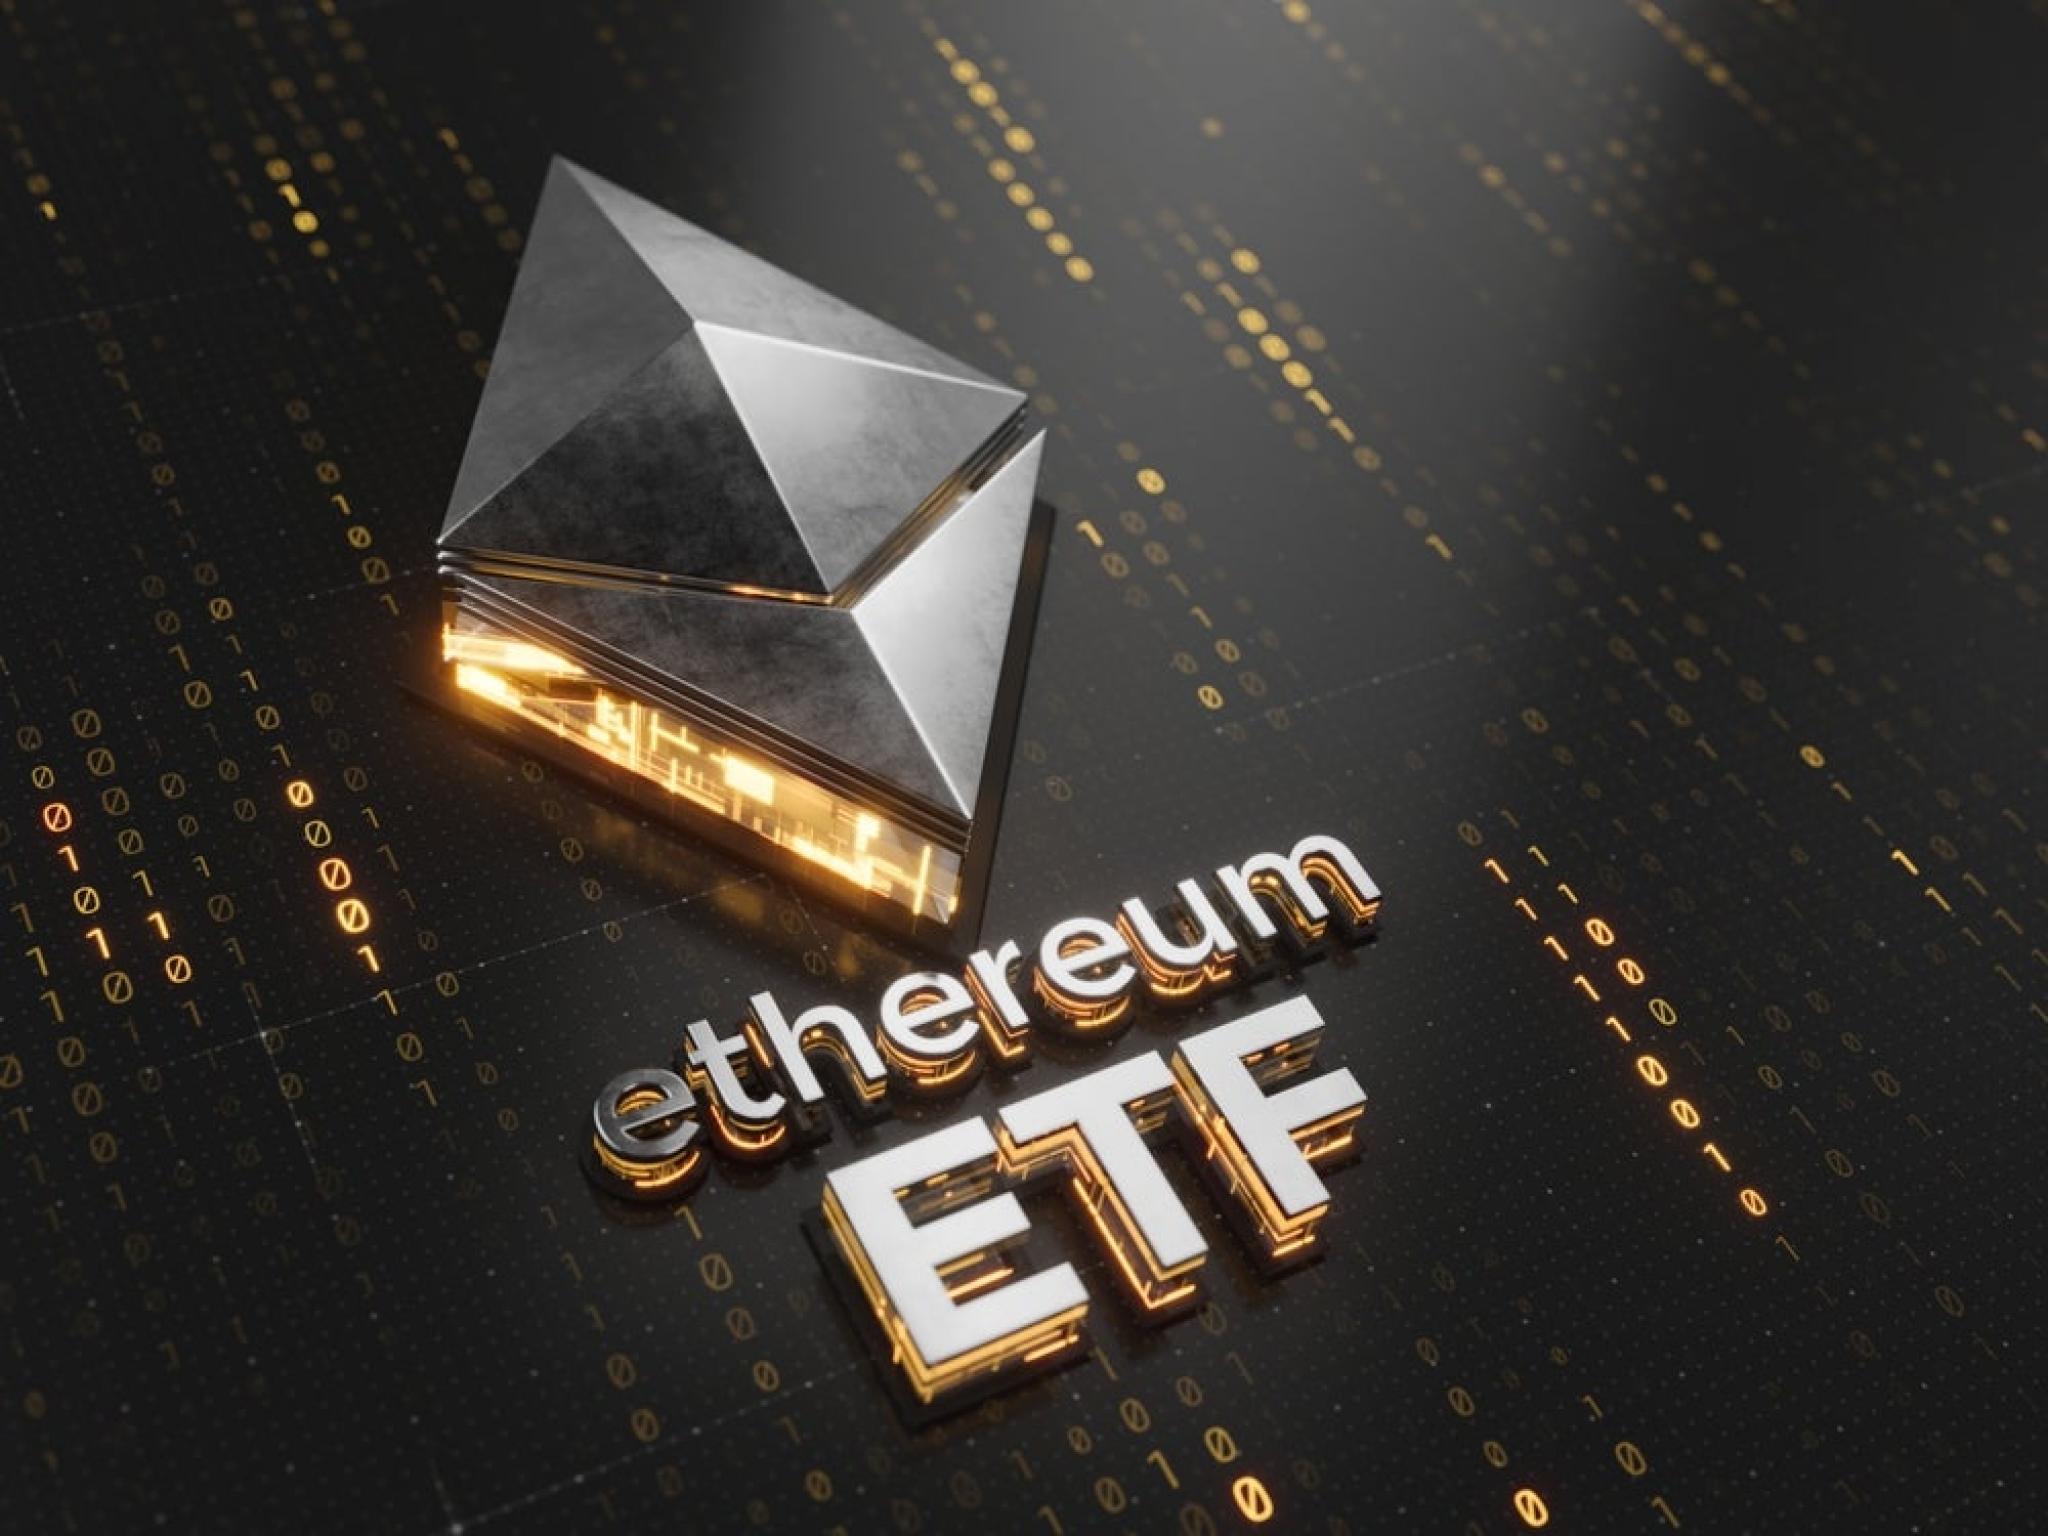  how-ethereum-etf-inflows-will-impact-bitcoin-and-cryptocurrency-prices 